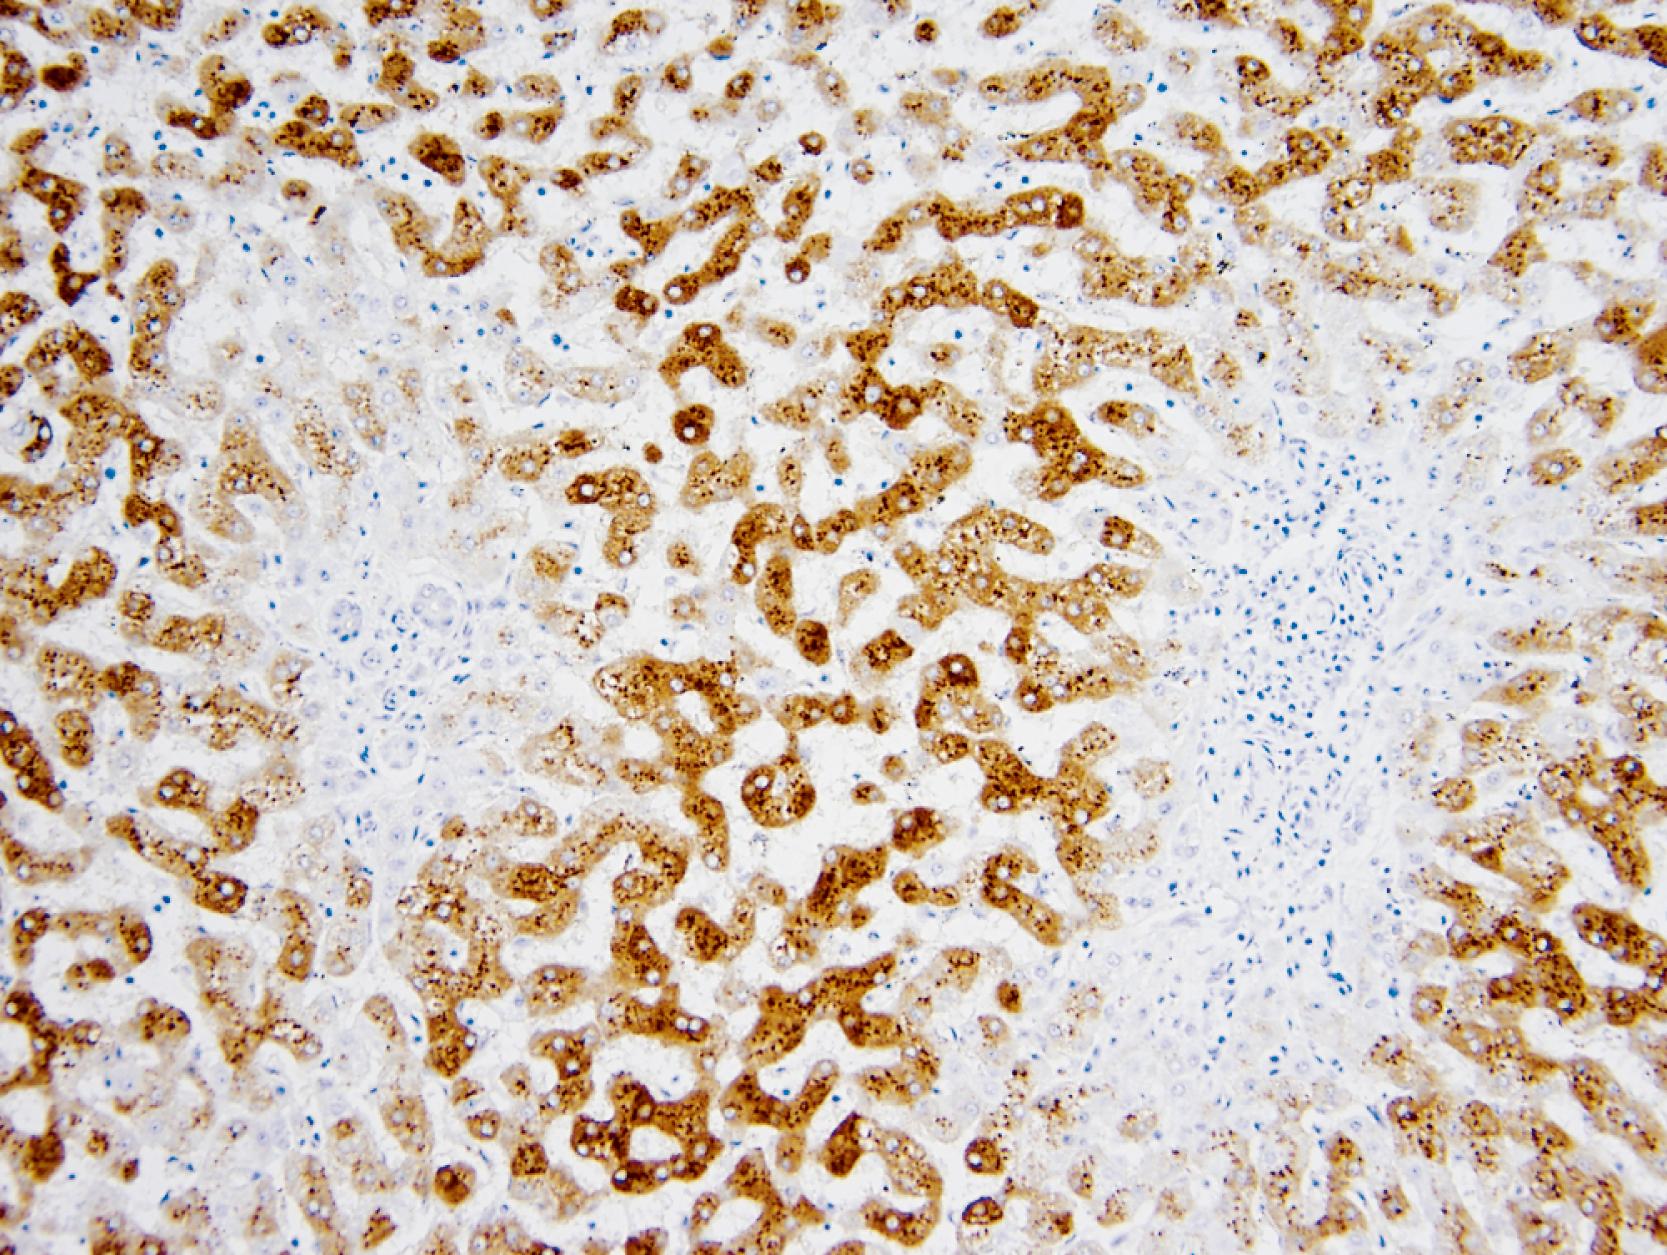 FIGURE 56.5, Diffuse granular cytoplasmic staining with serum amyloid A in inflammatory HCA.